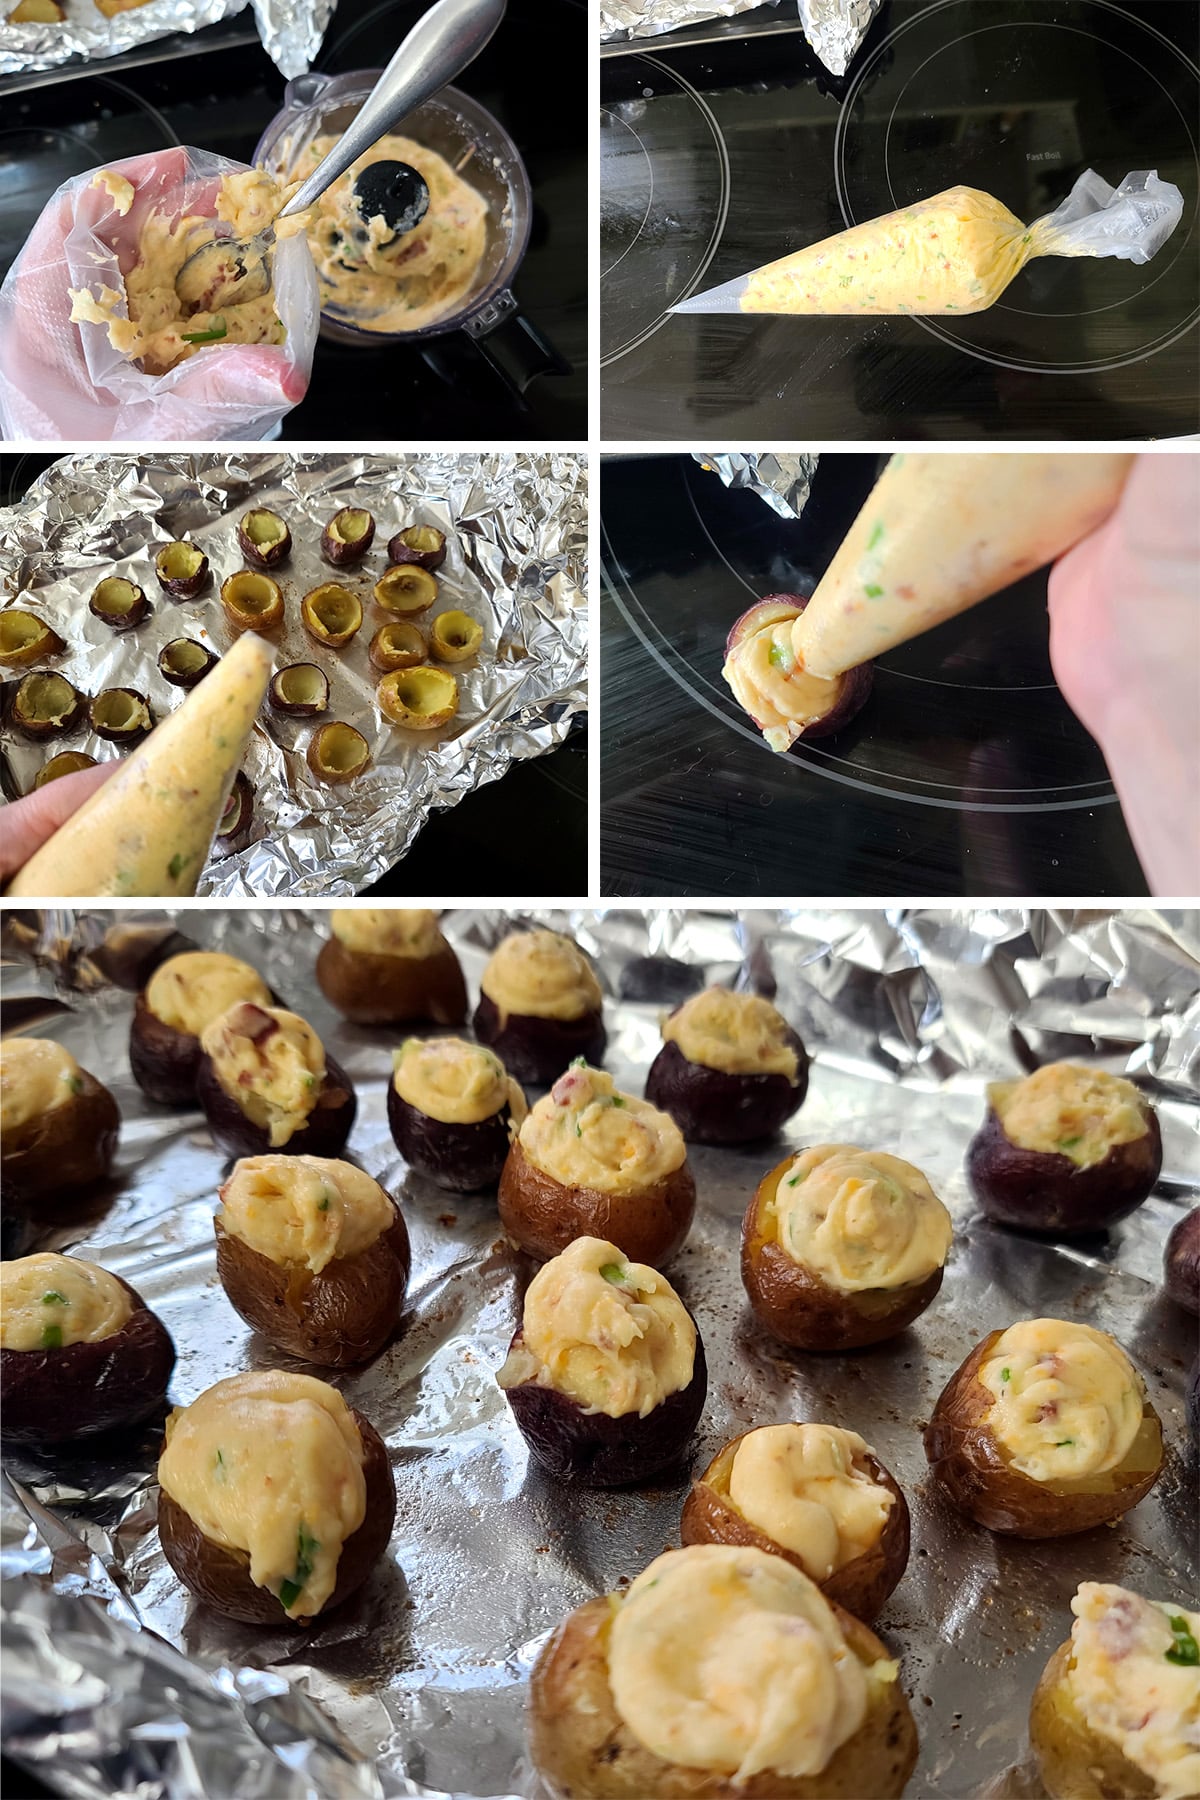 A 5 part image showing the loaded mashed potato mixture being spooned into a pastry bag and piped into the hollowed out mini potatoes.